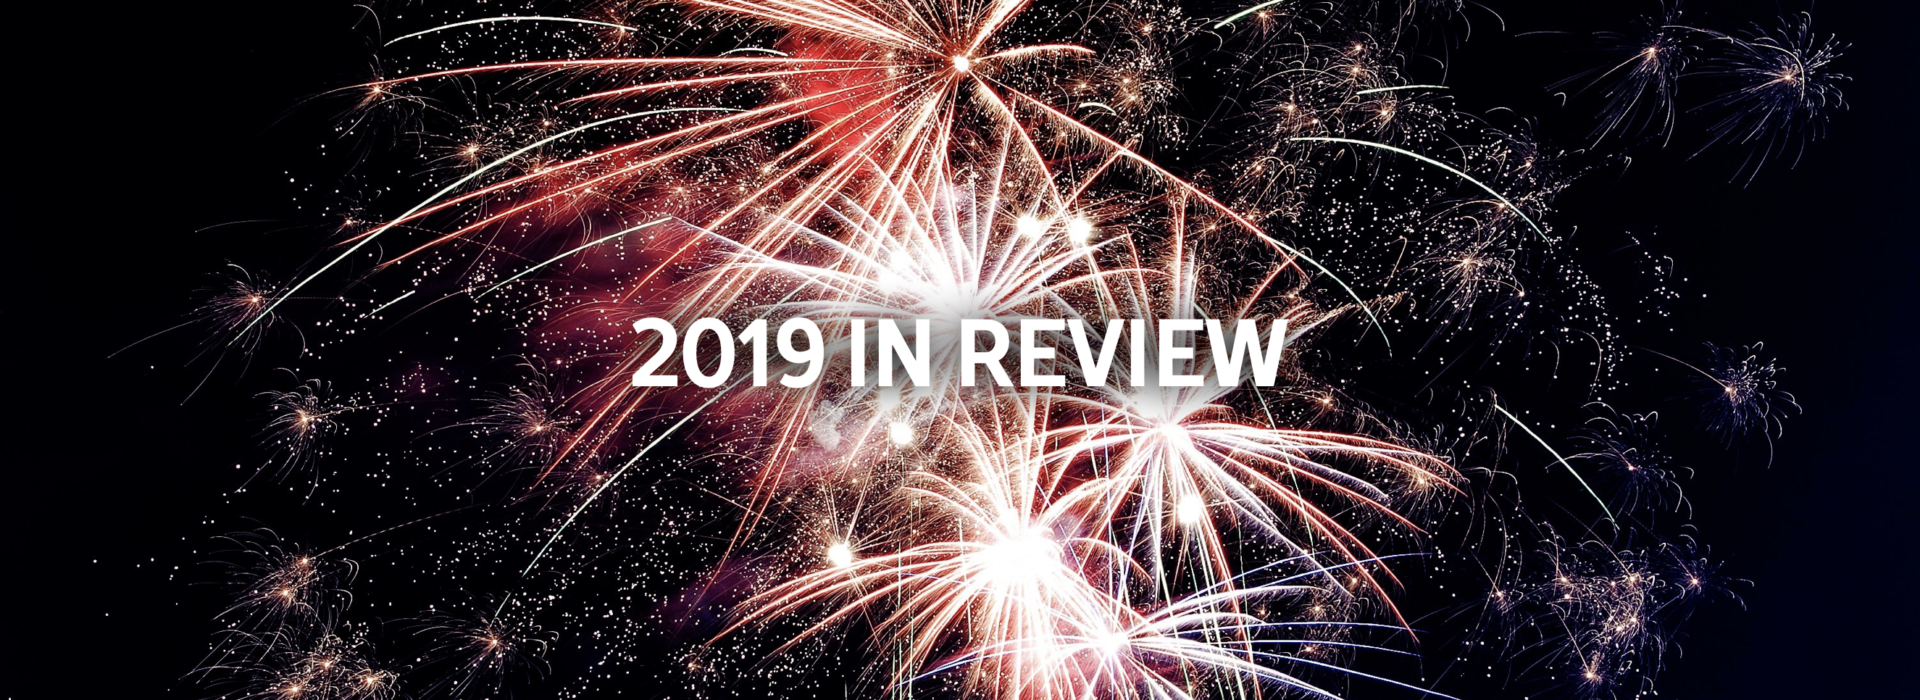 2019 IN REVIEW